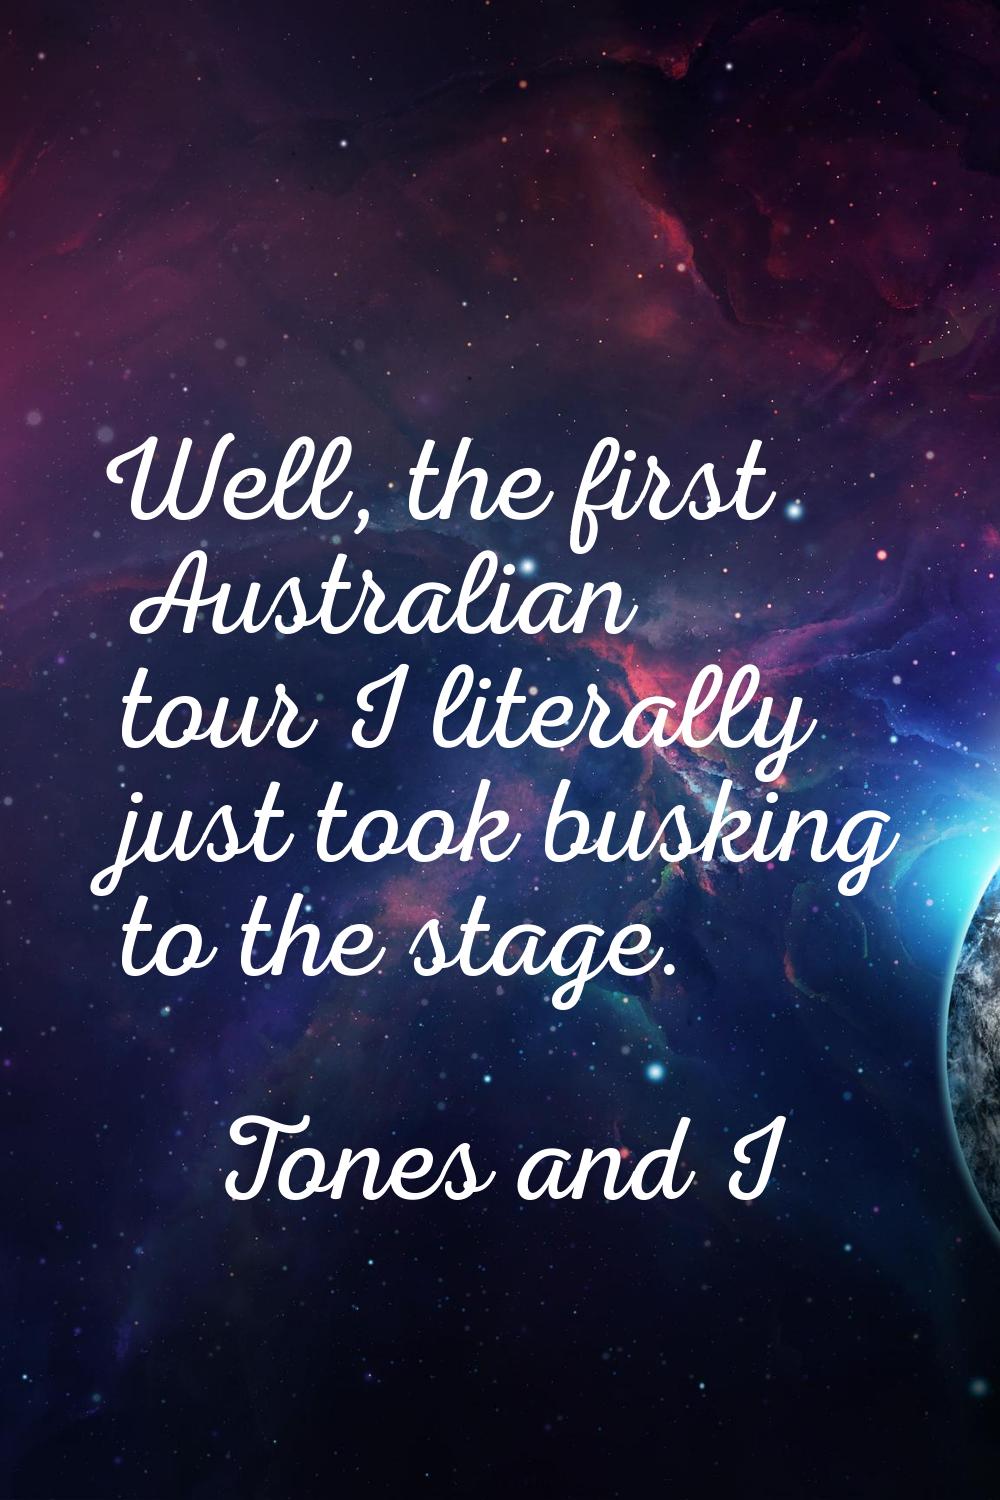 Well, the first Australian tour I literally just took busking to the stage.